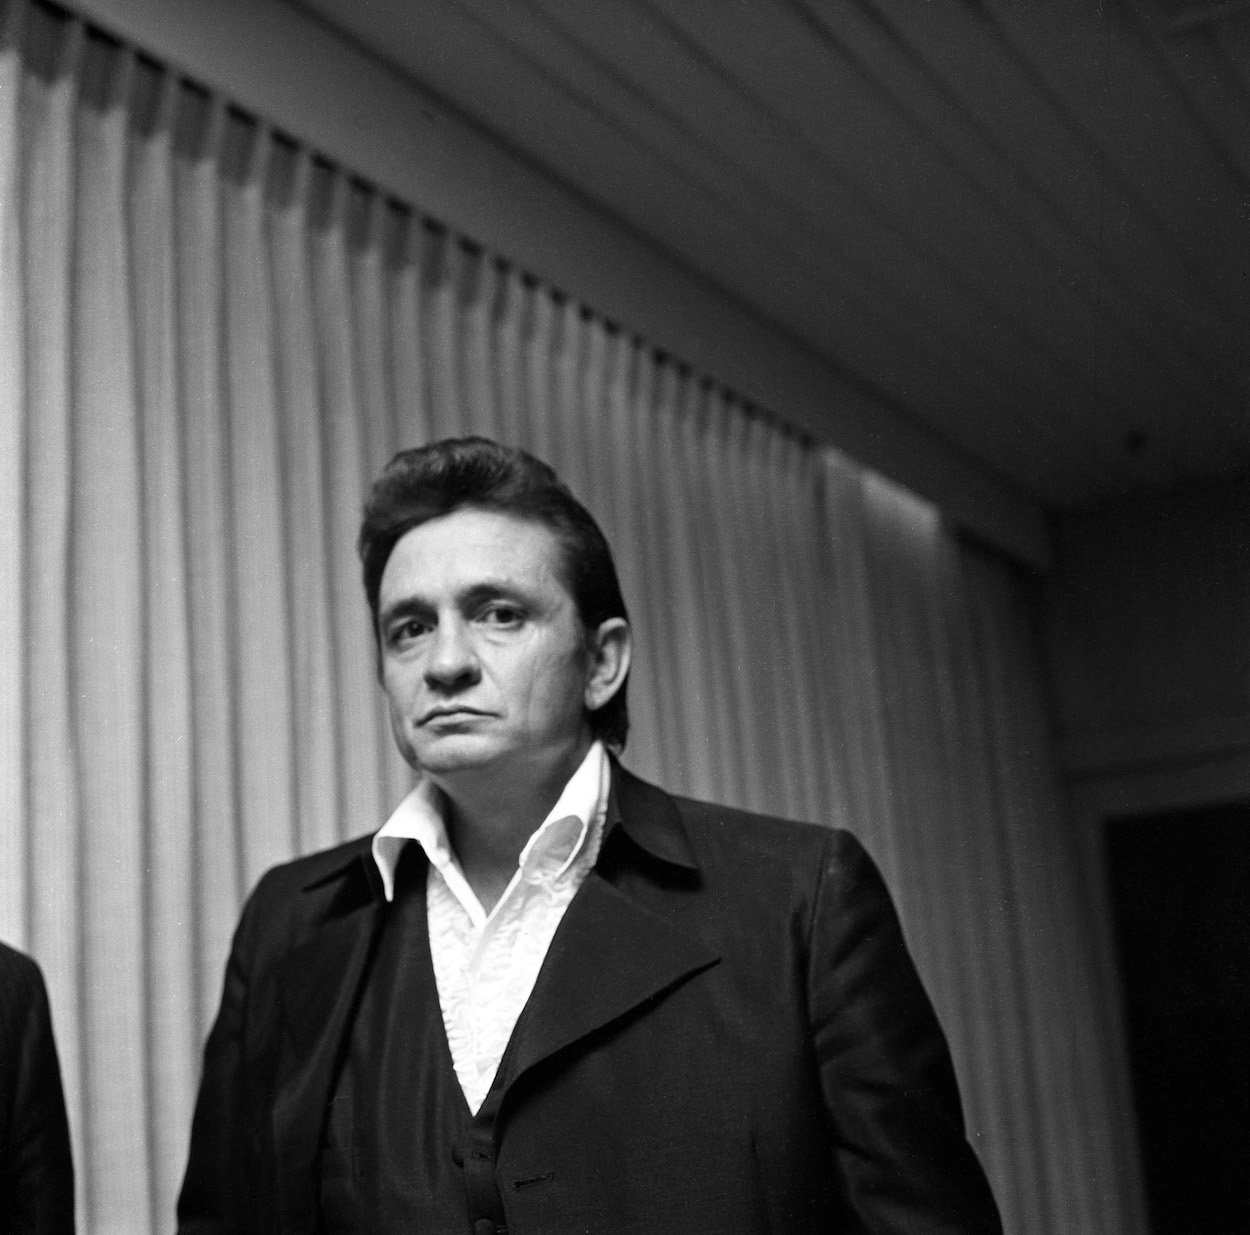 Johnny Cash Lost $75,000 From His Bank Account, and it Was Totally Worth It